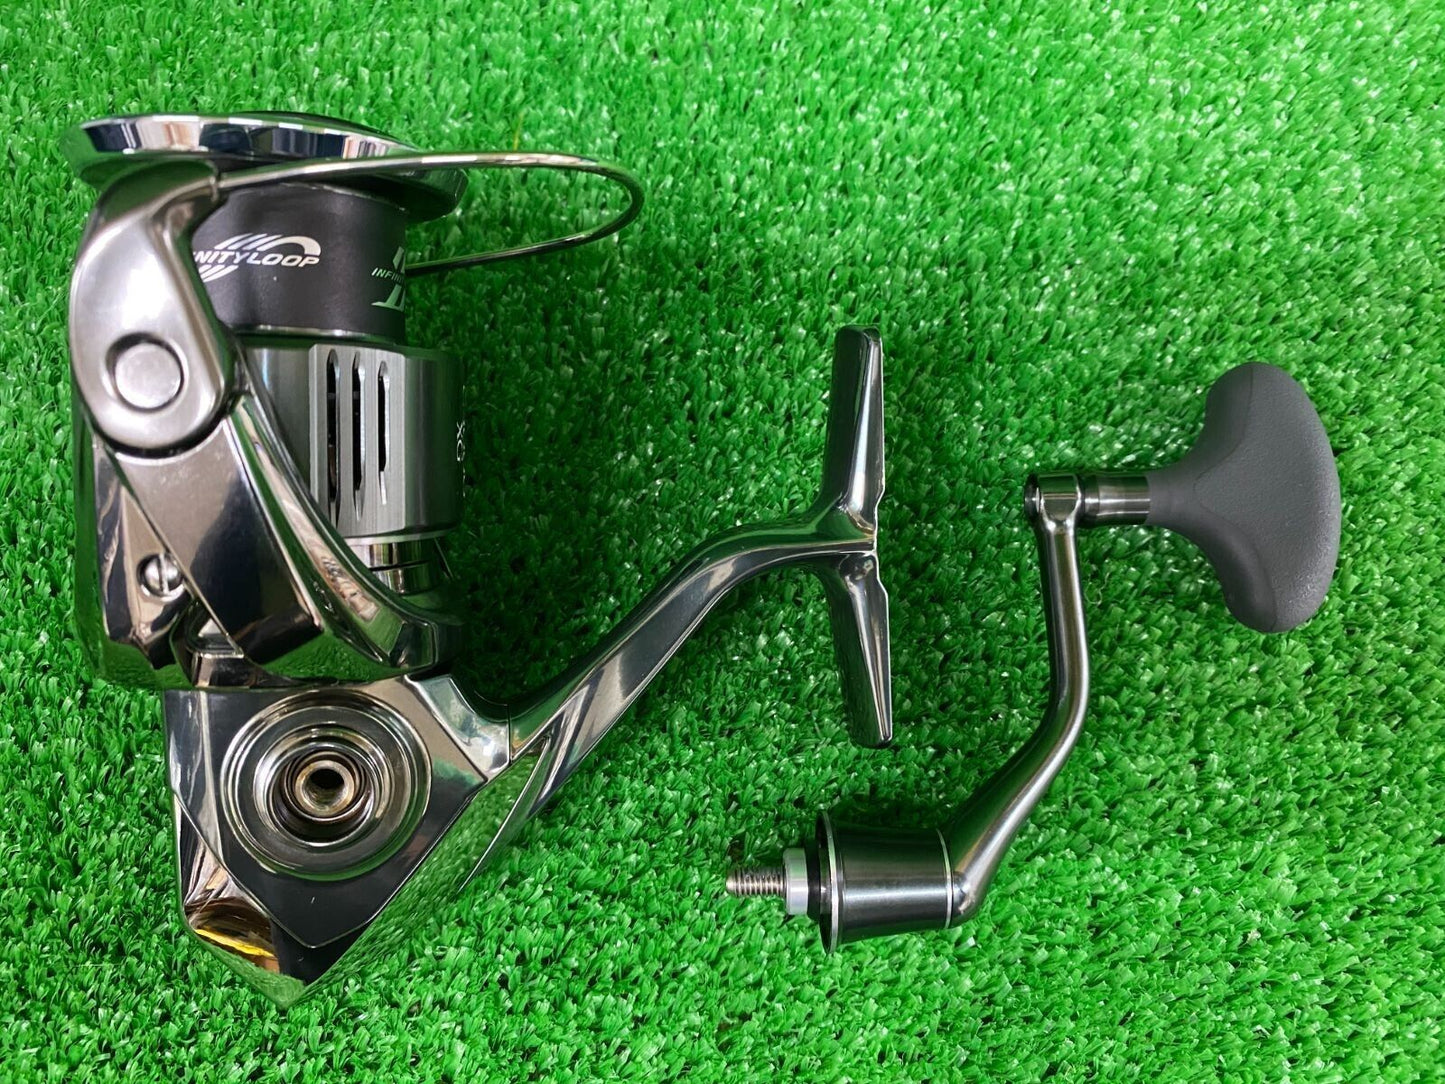 Shimano 22 STELLA C3000XG Spinning Reel Gear Ratio 6.4:1 from F/S from Japan